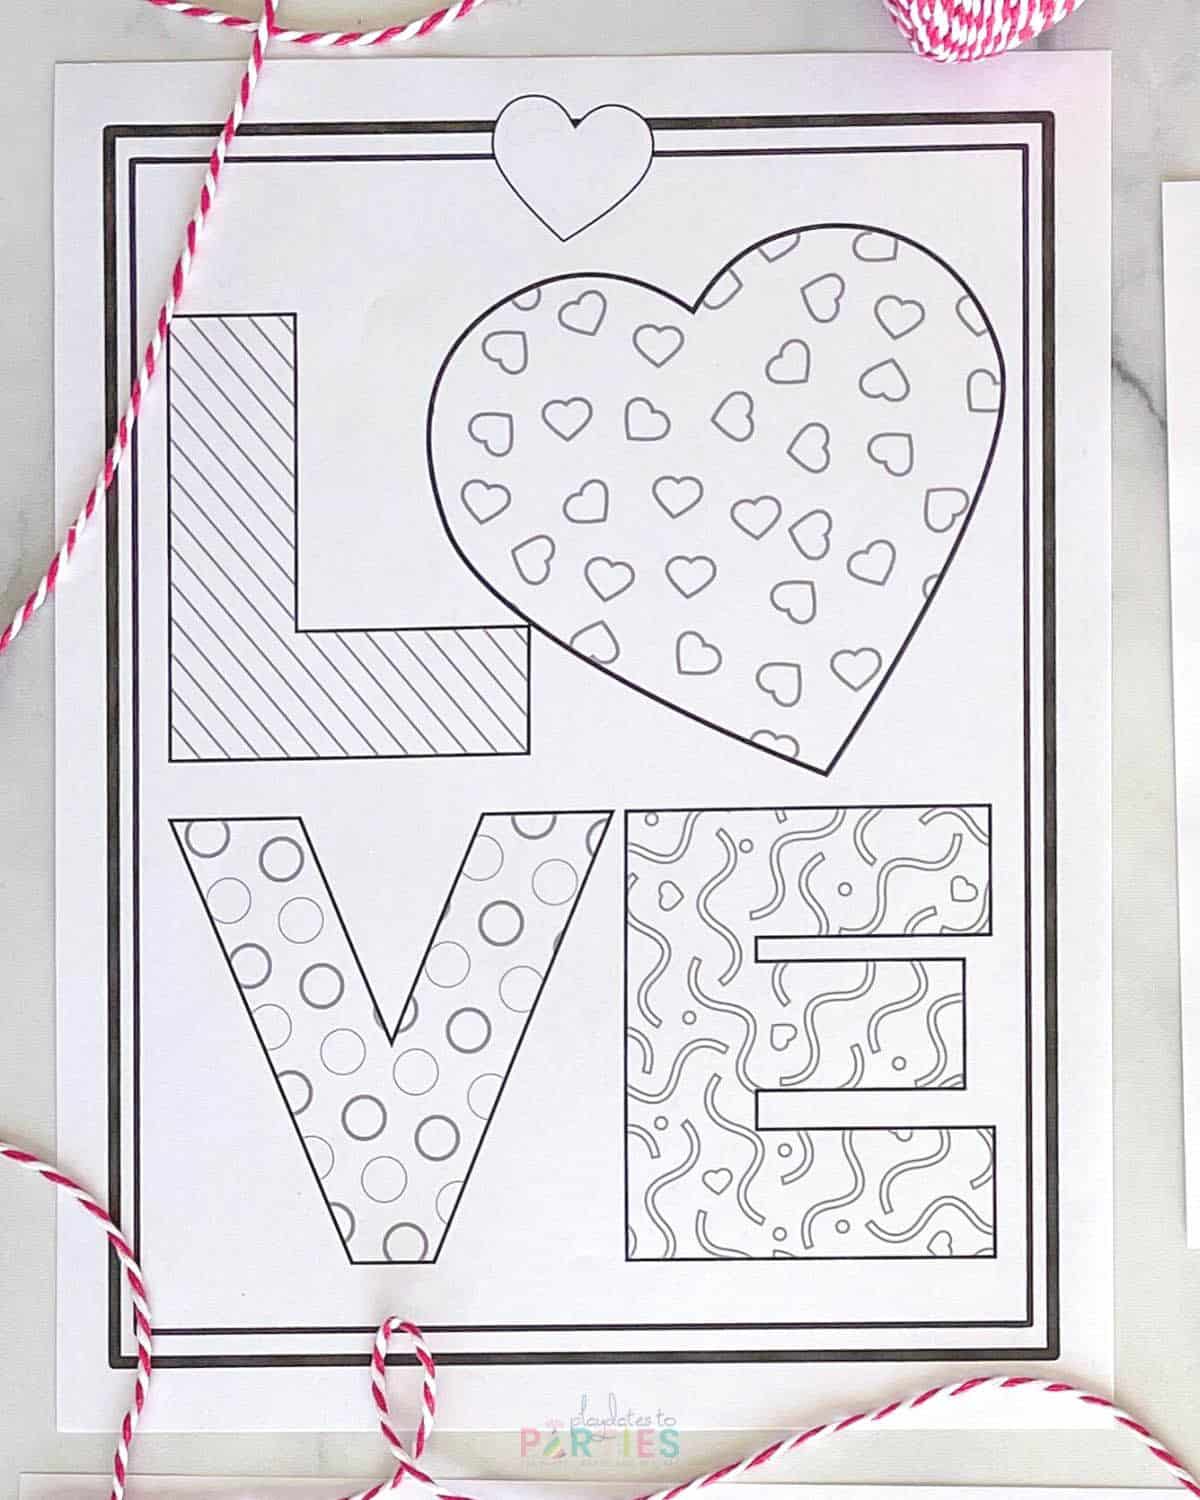 A blank coloring sheet with patterned letters for LOVE.